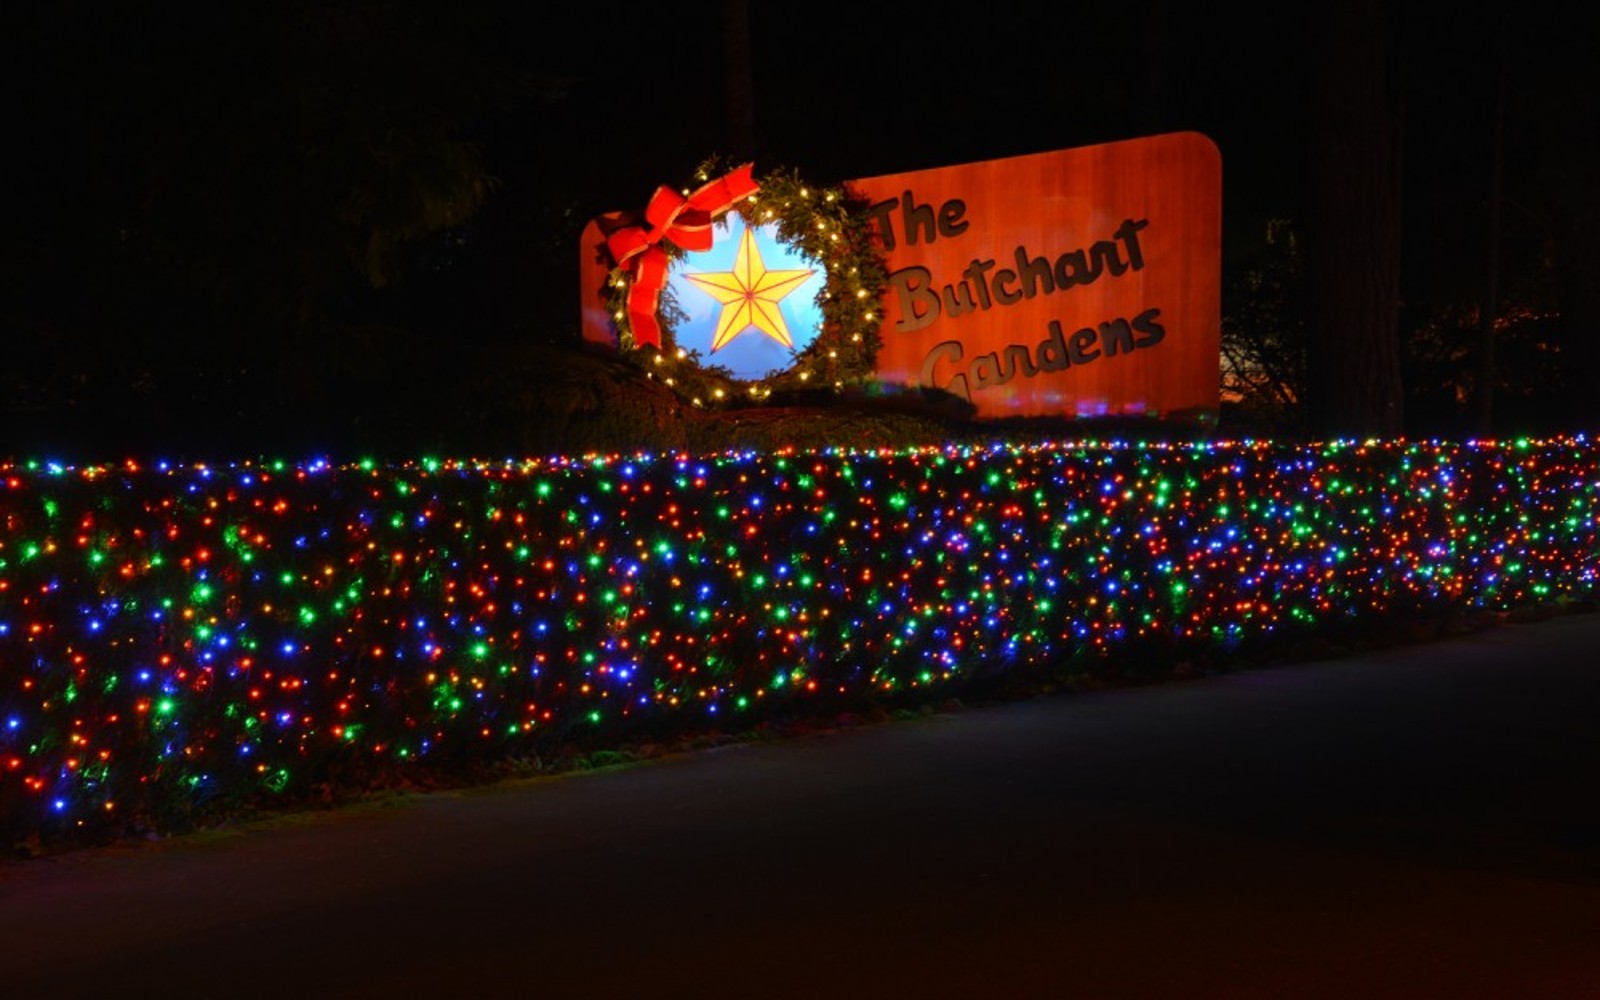 the magic of christmas event iat butchart gardens in victoria in january